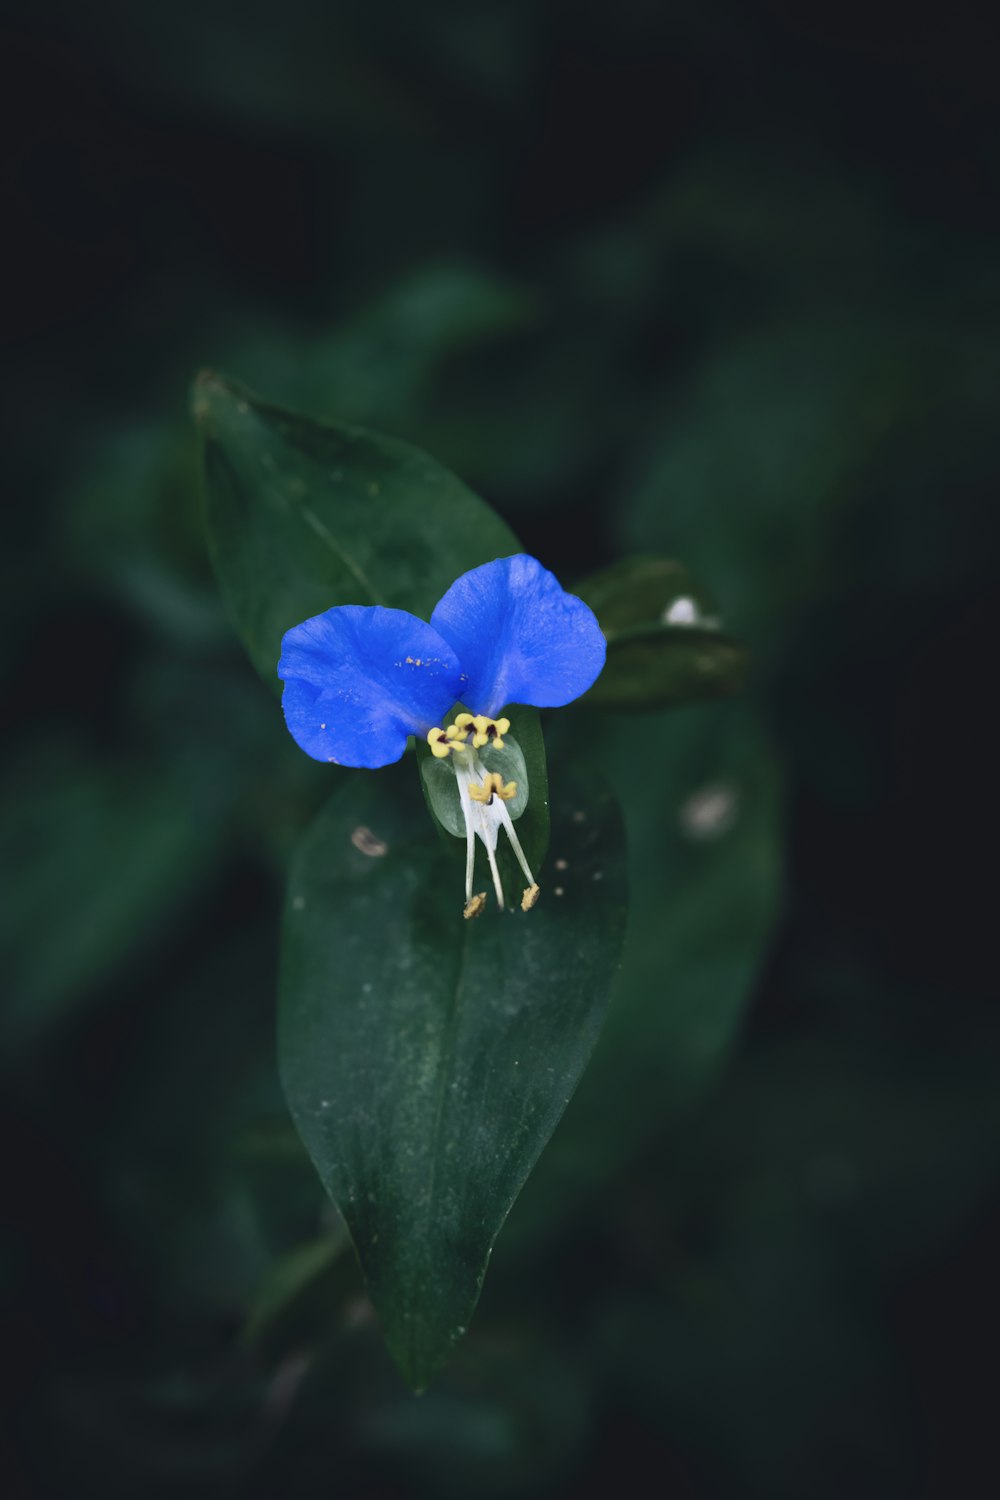 a blue flower with a yellow center sitting on top of a green leaf